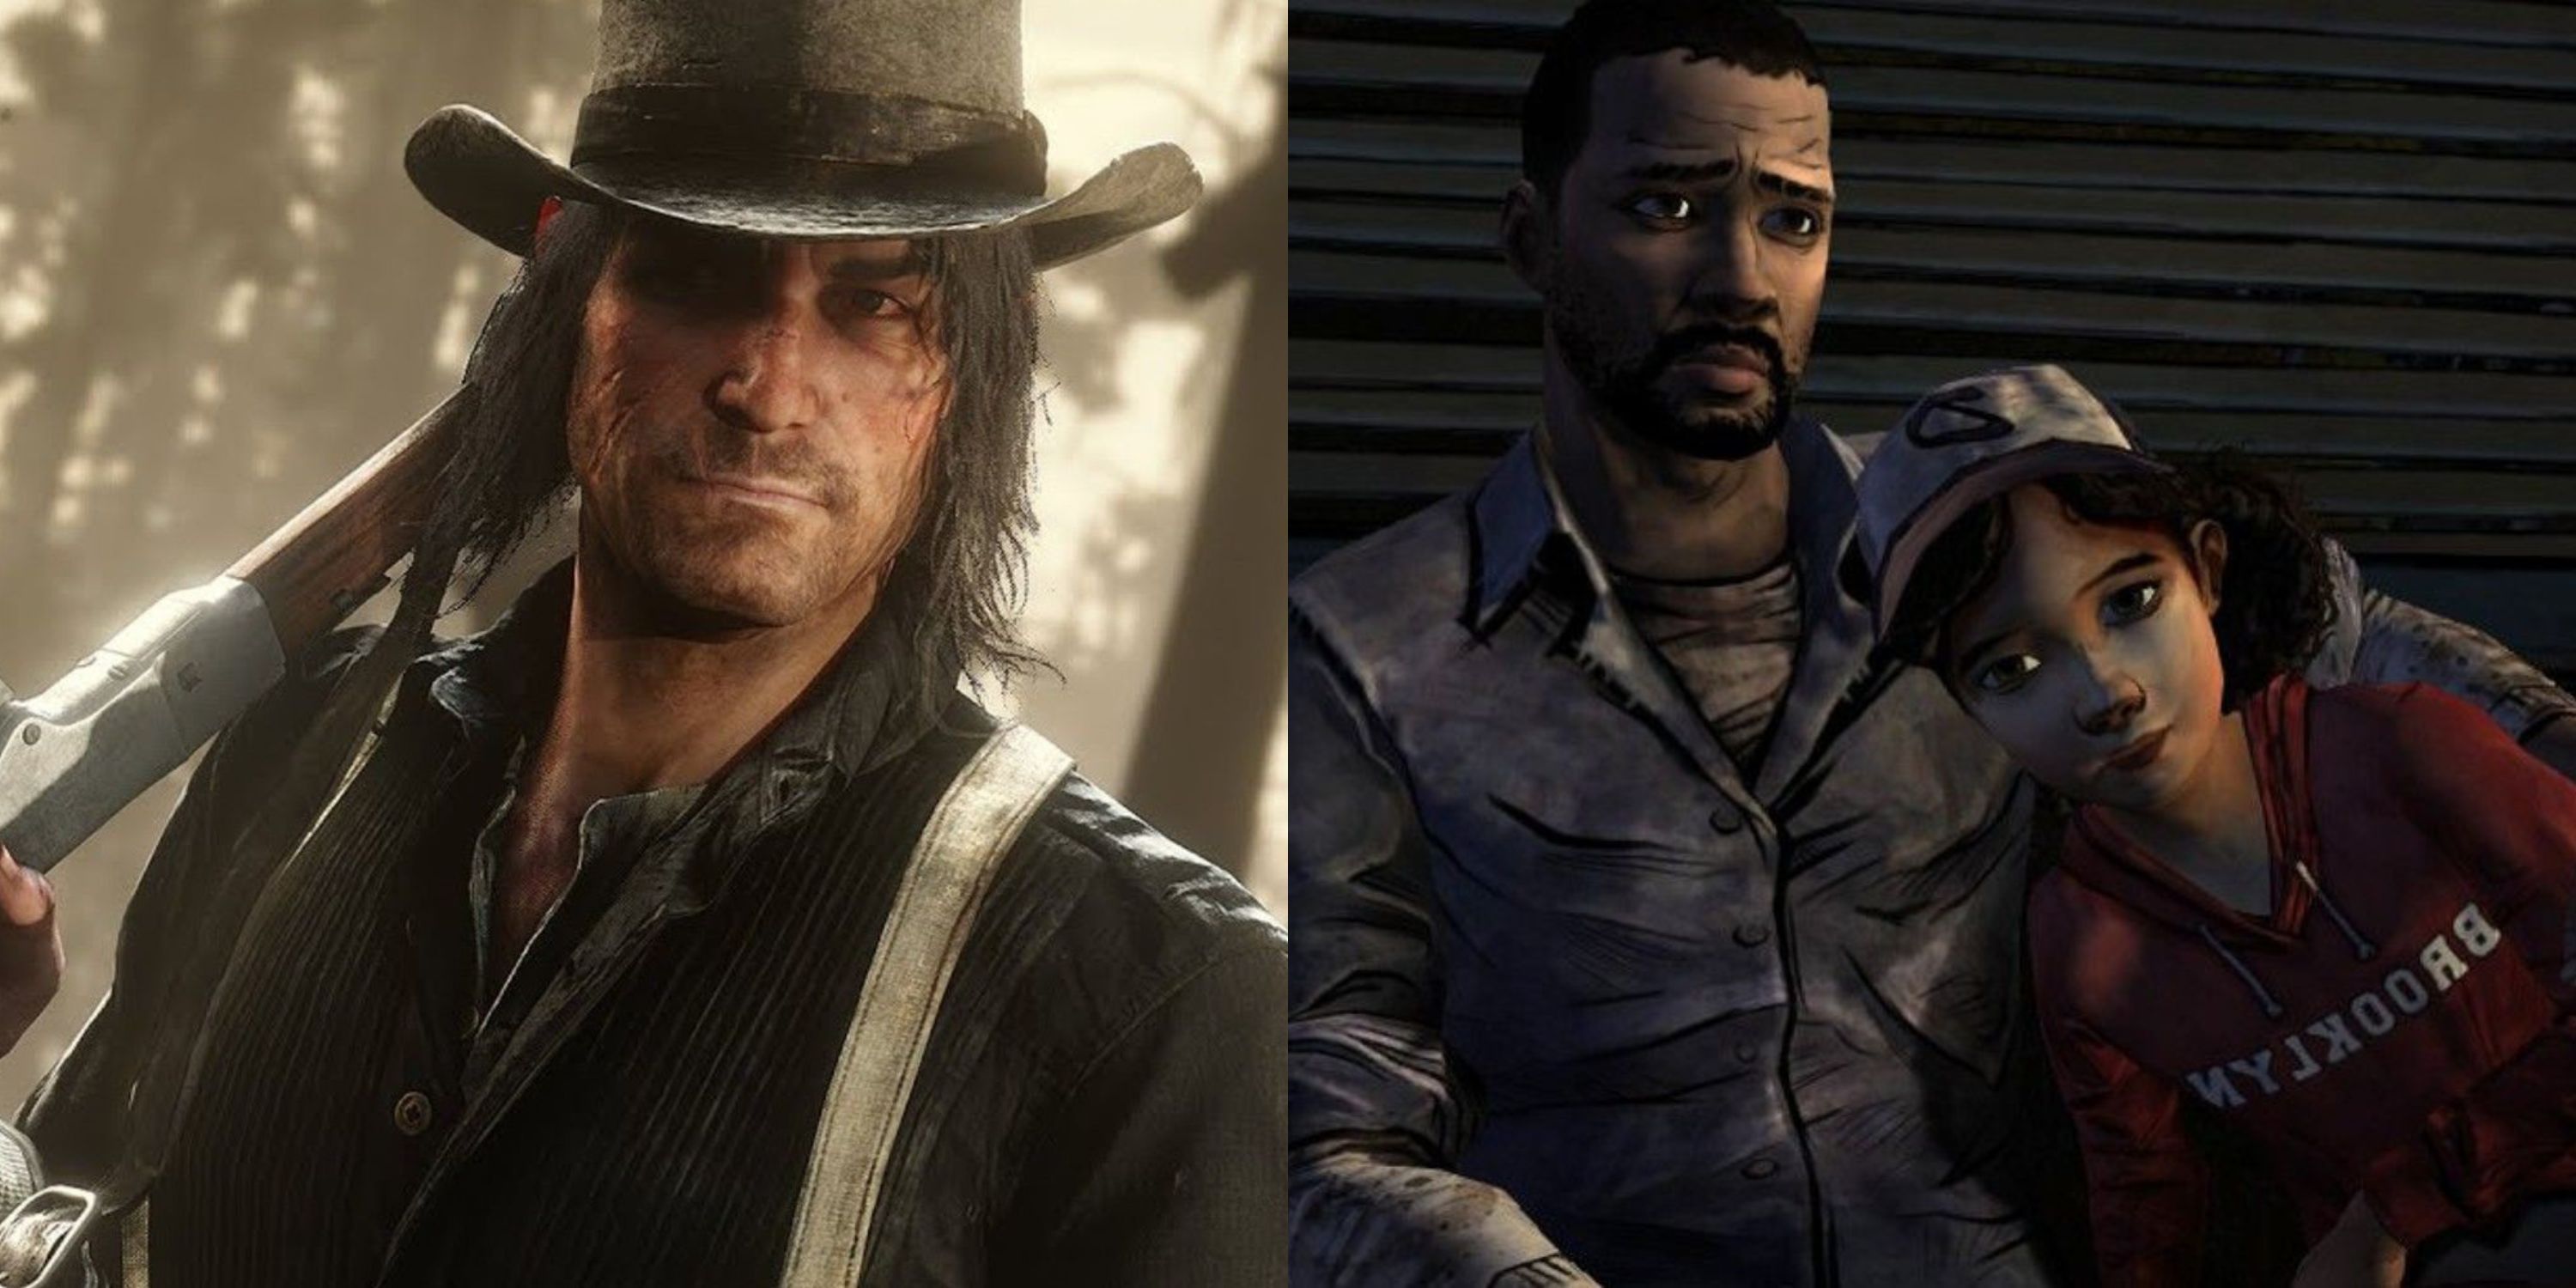 10 Video Game Plot Twists That Upset Players, According To Reddit